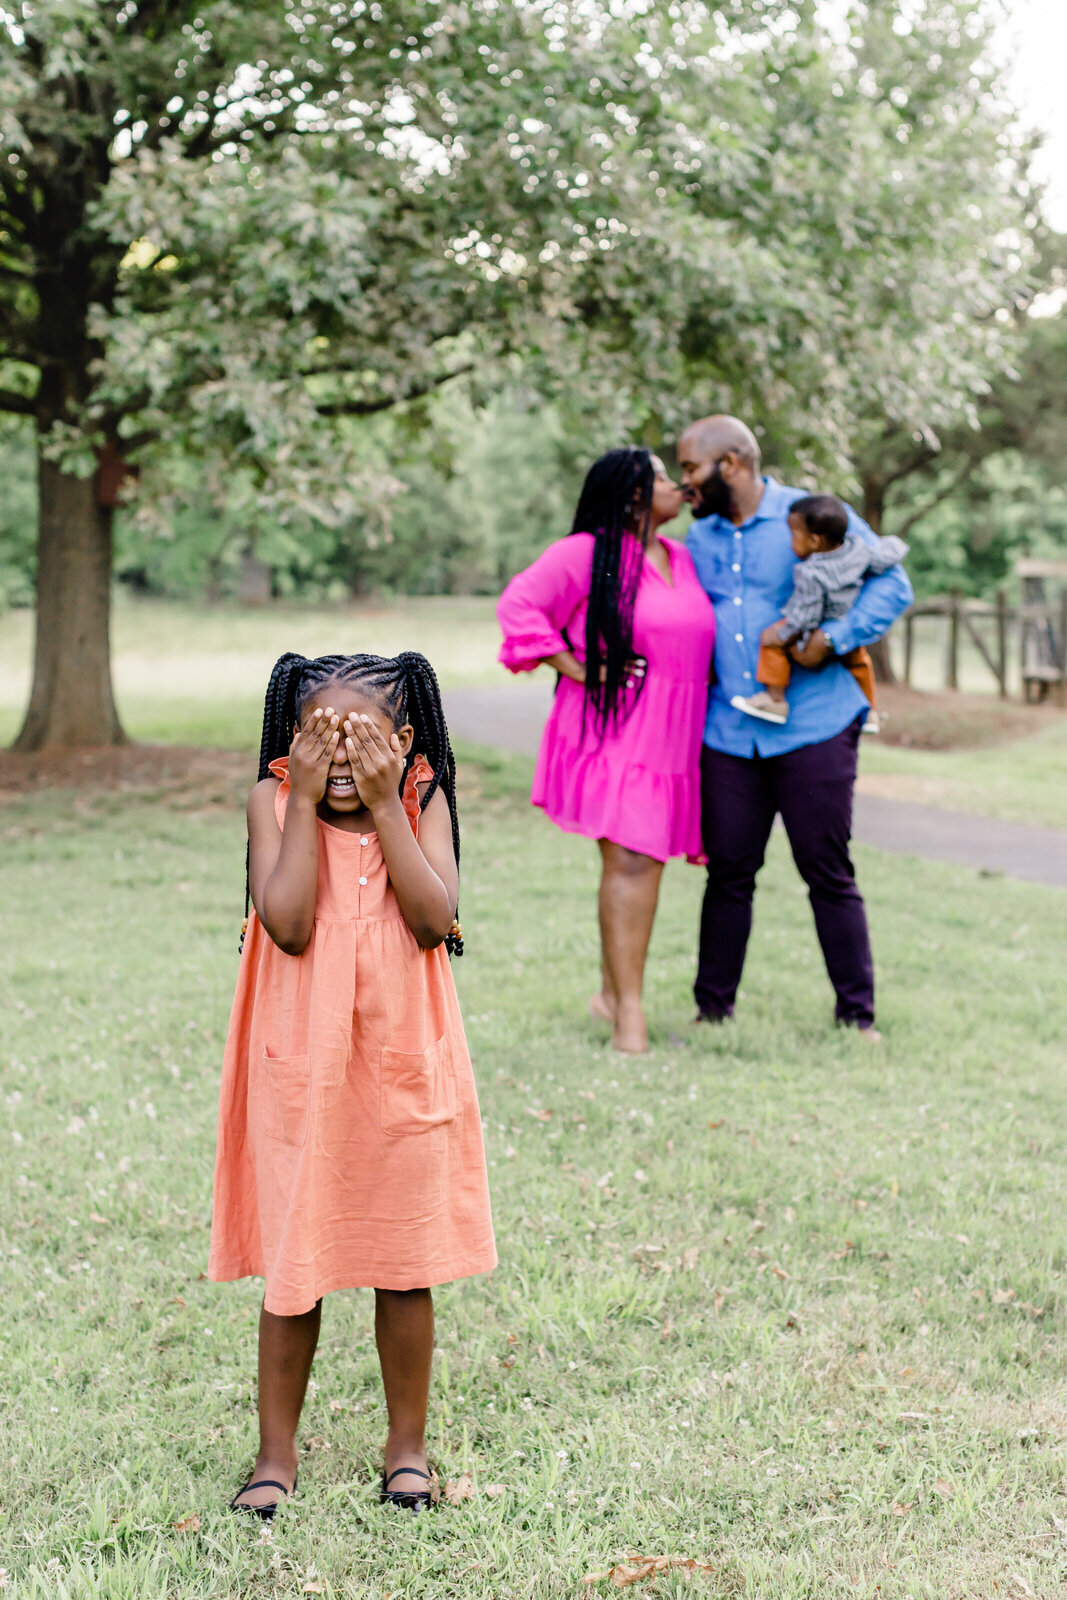 Young daughter covers her eyes while standing in front of parents who are kidding while holding their young son at McDaniel Farm Park